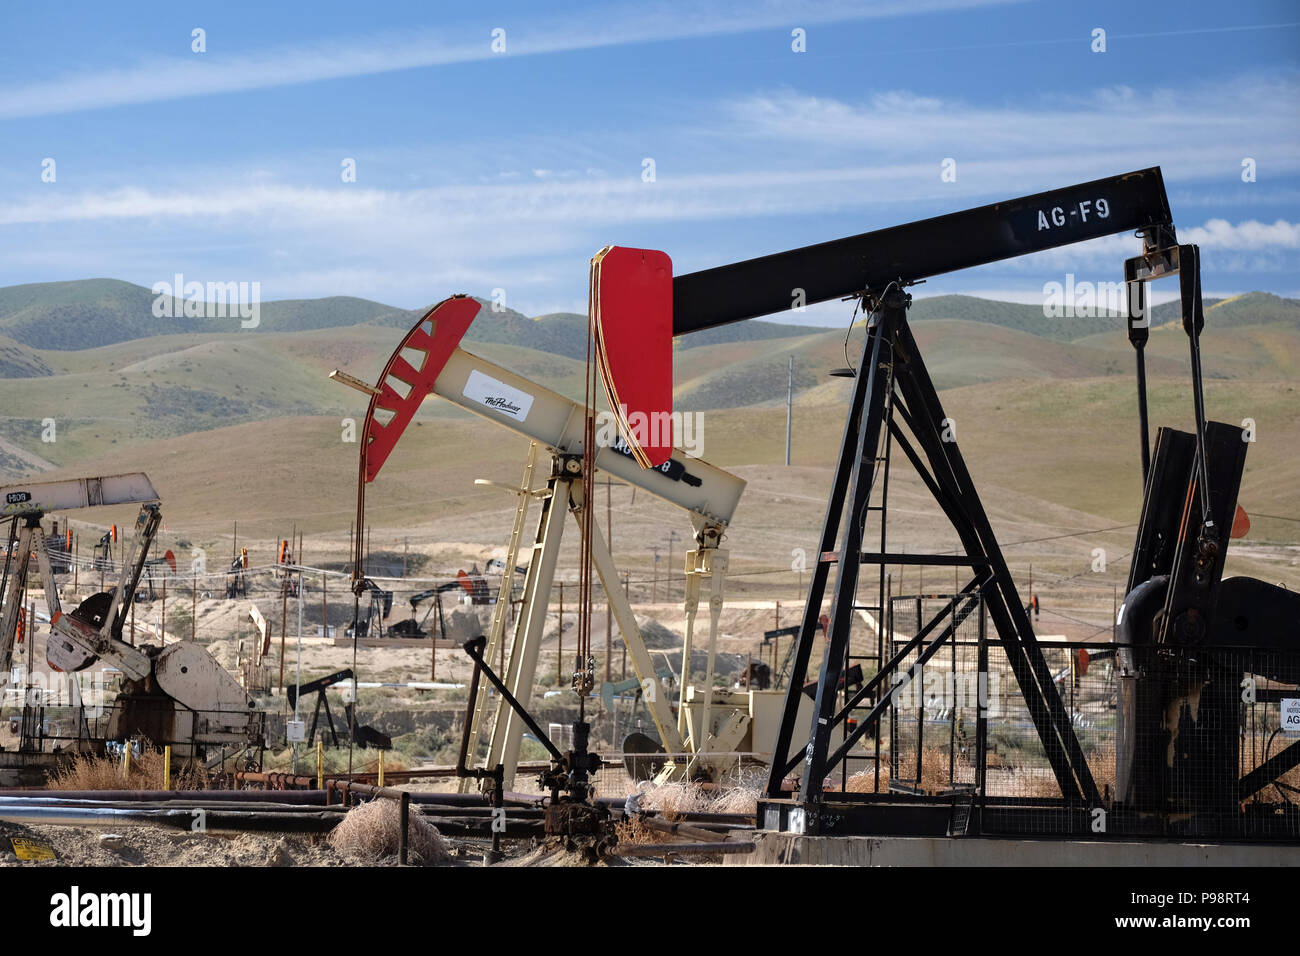 Busy pumpjacks at work in the Sunset-Midway oil field in kern county california Stock Photo